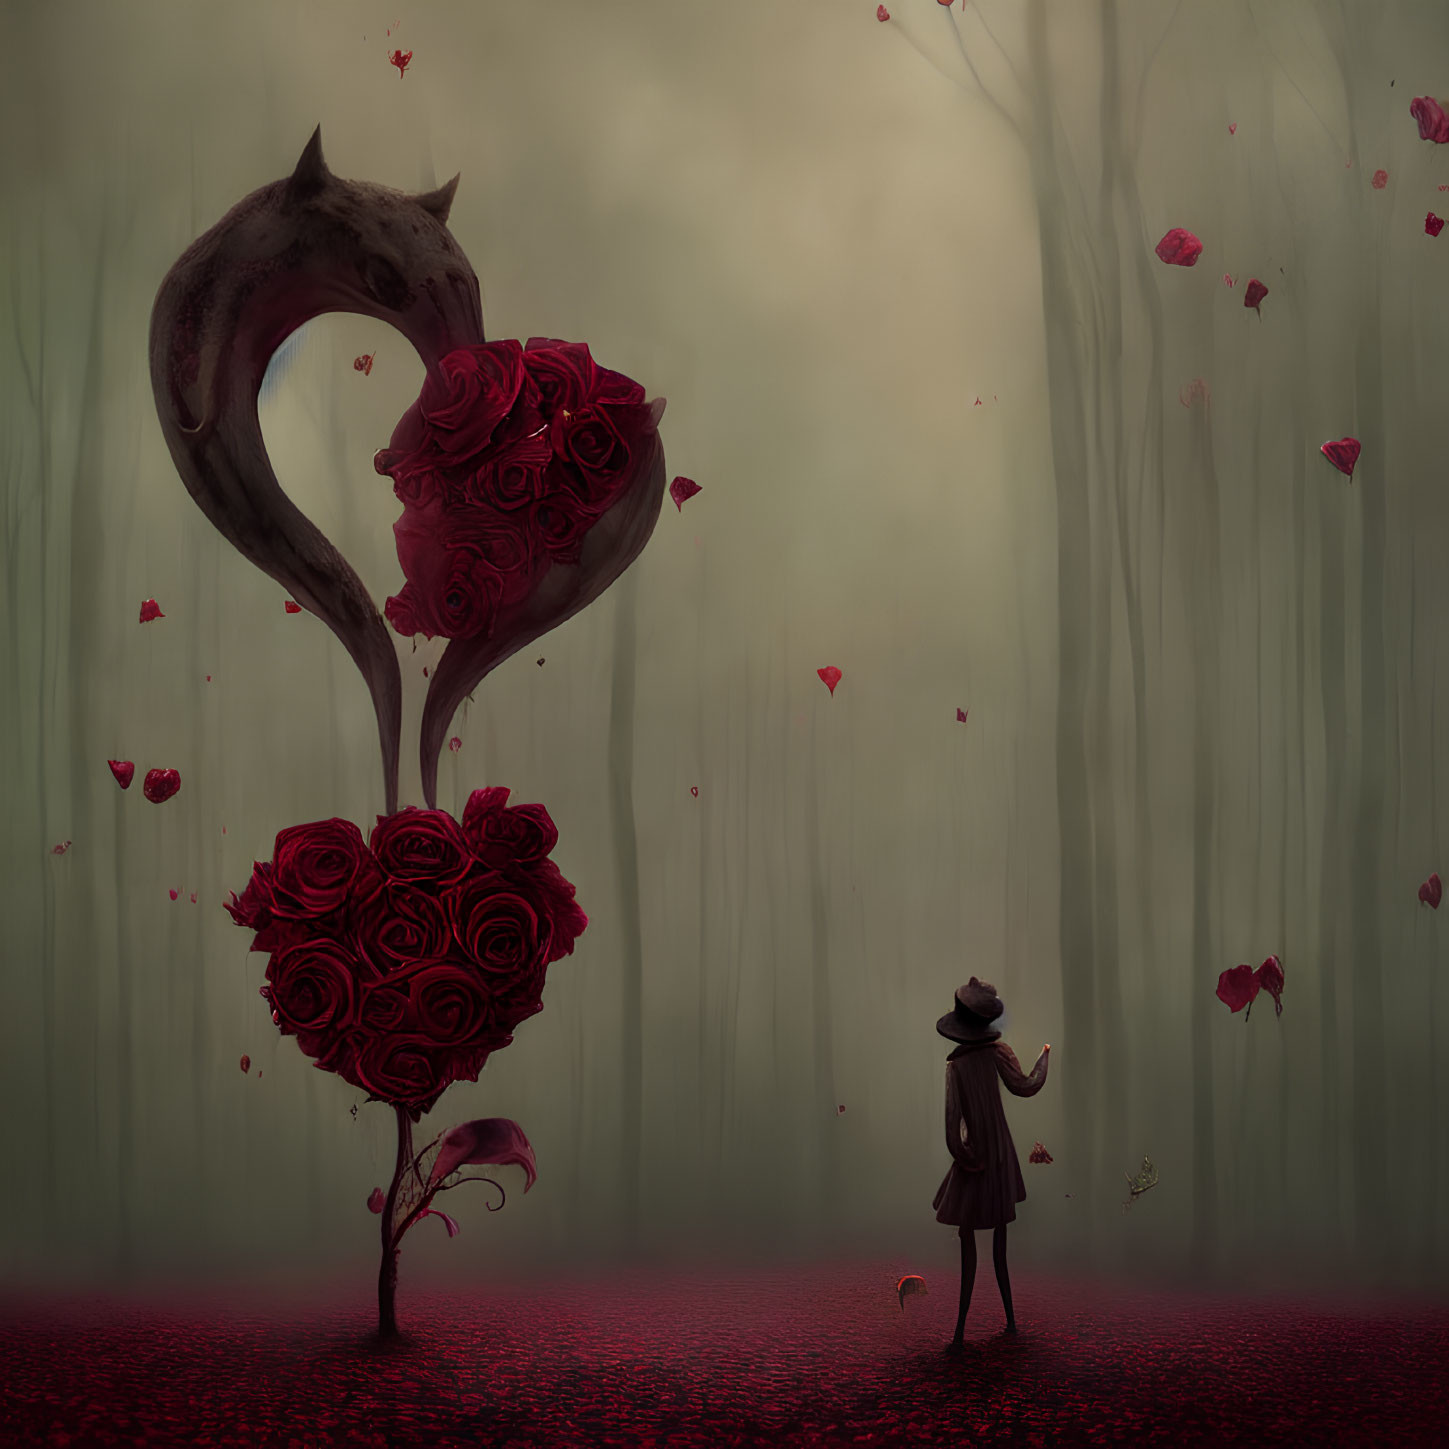 Person in Hat in Surreal Forest with Heart-Shaped Roses and Cat-Like Tail